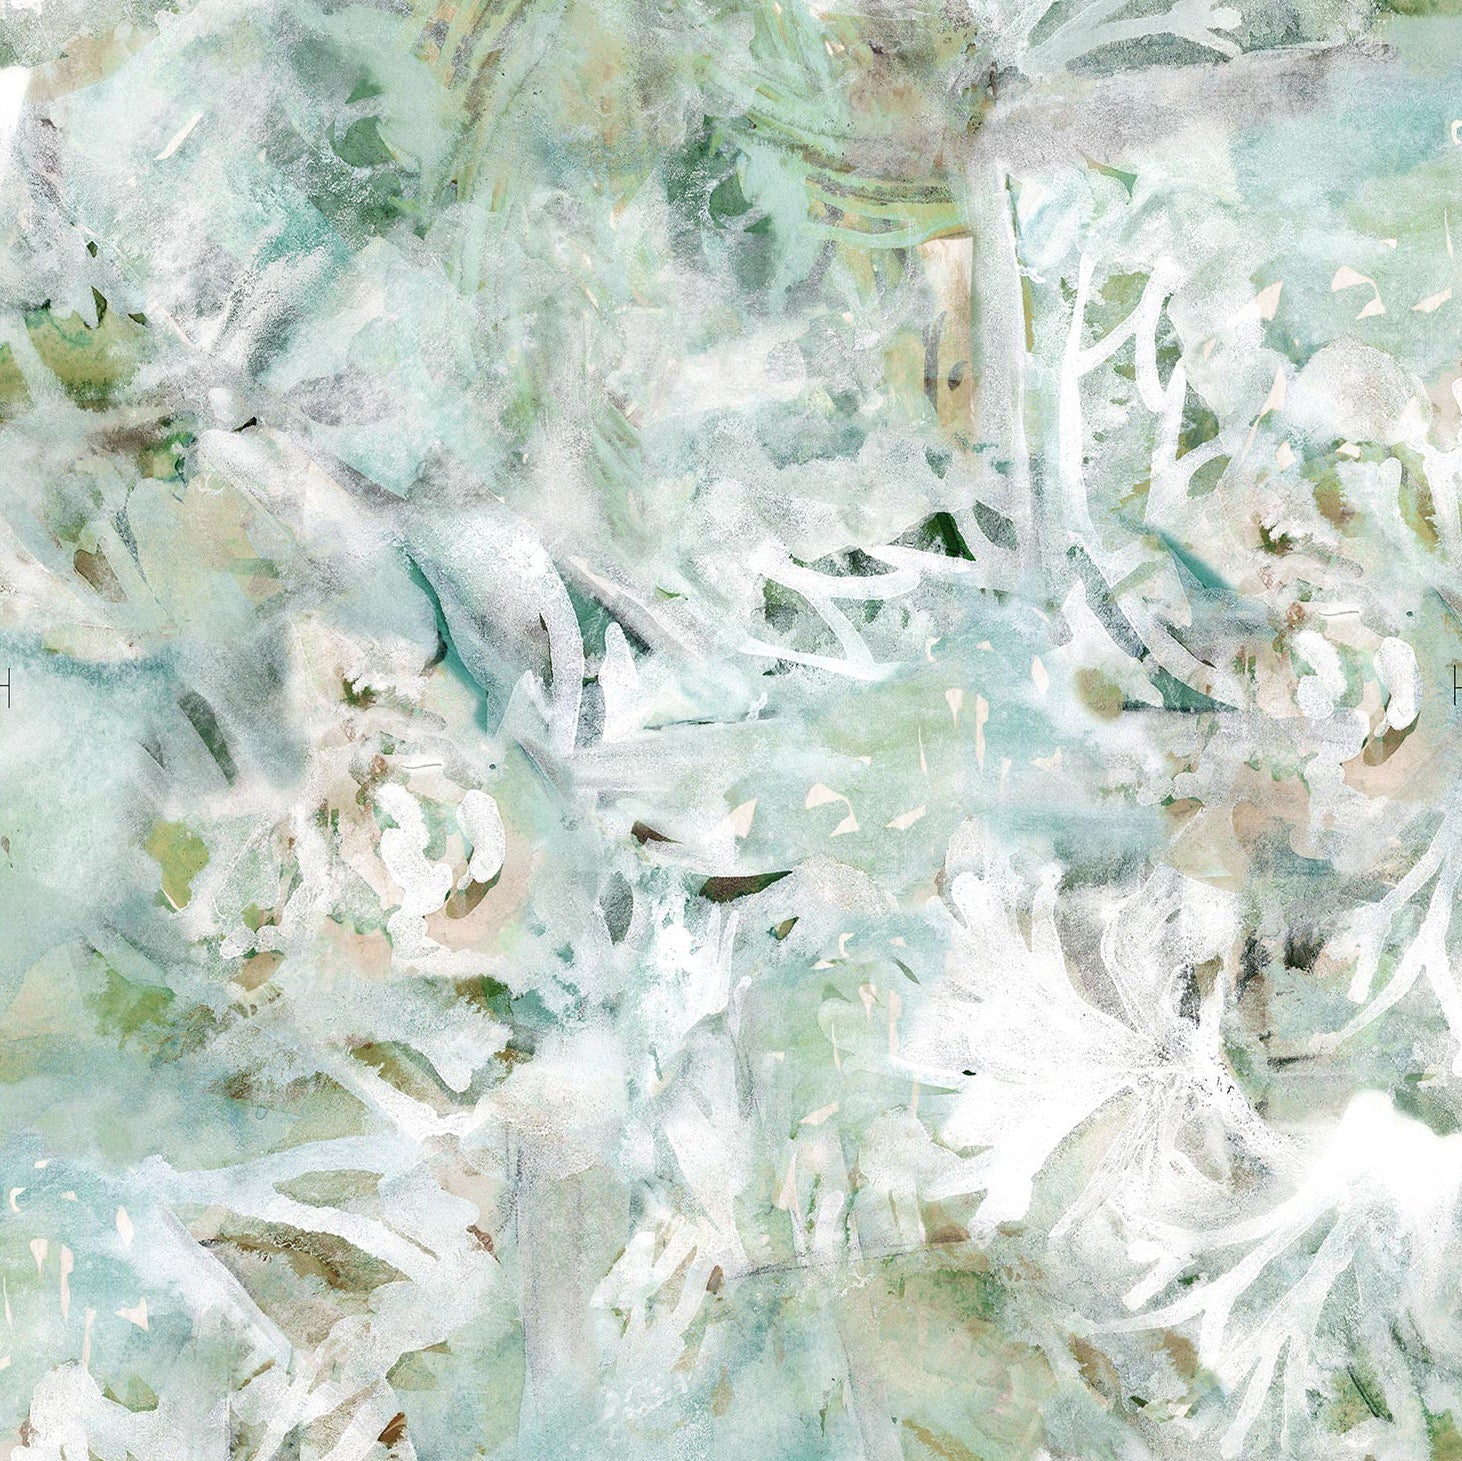 Detail of wallpaper in an abstract painted print in shades of green, tan and white.